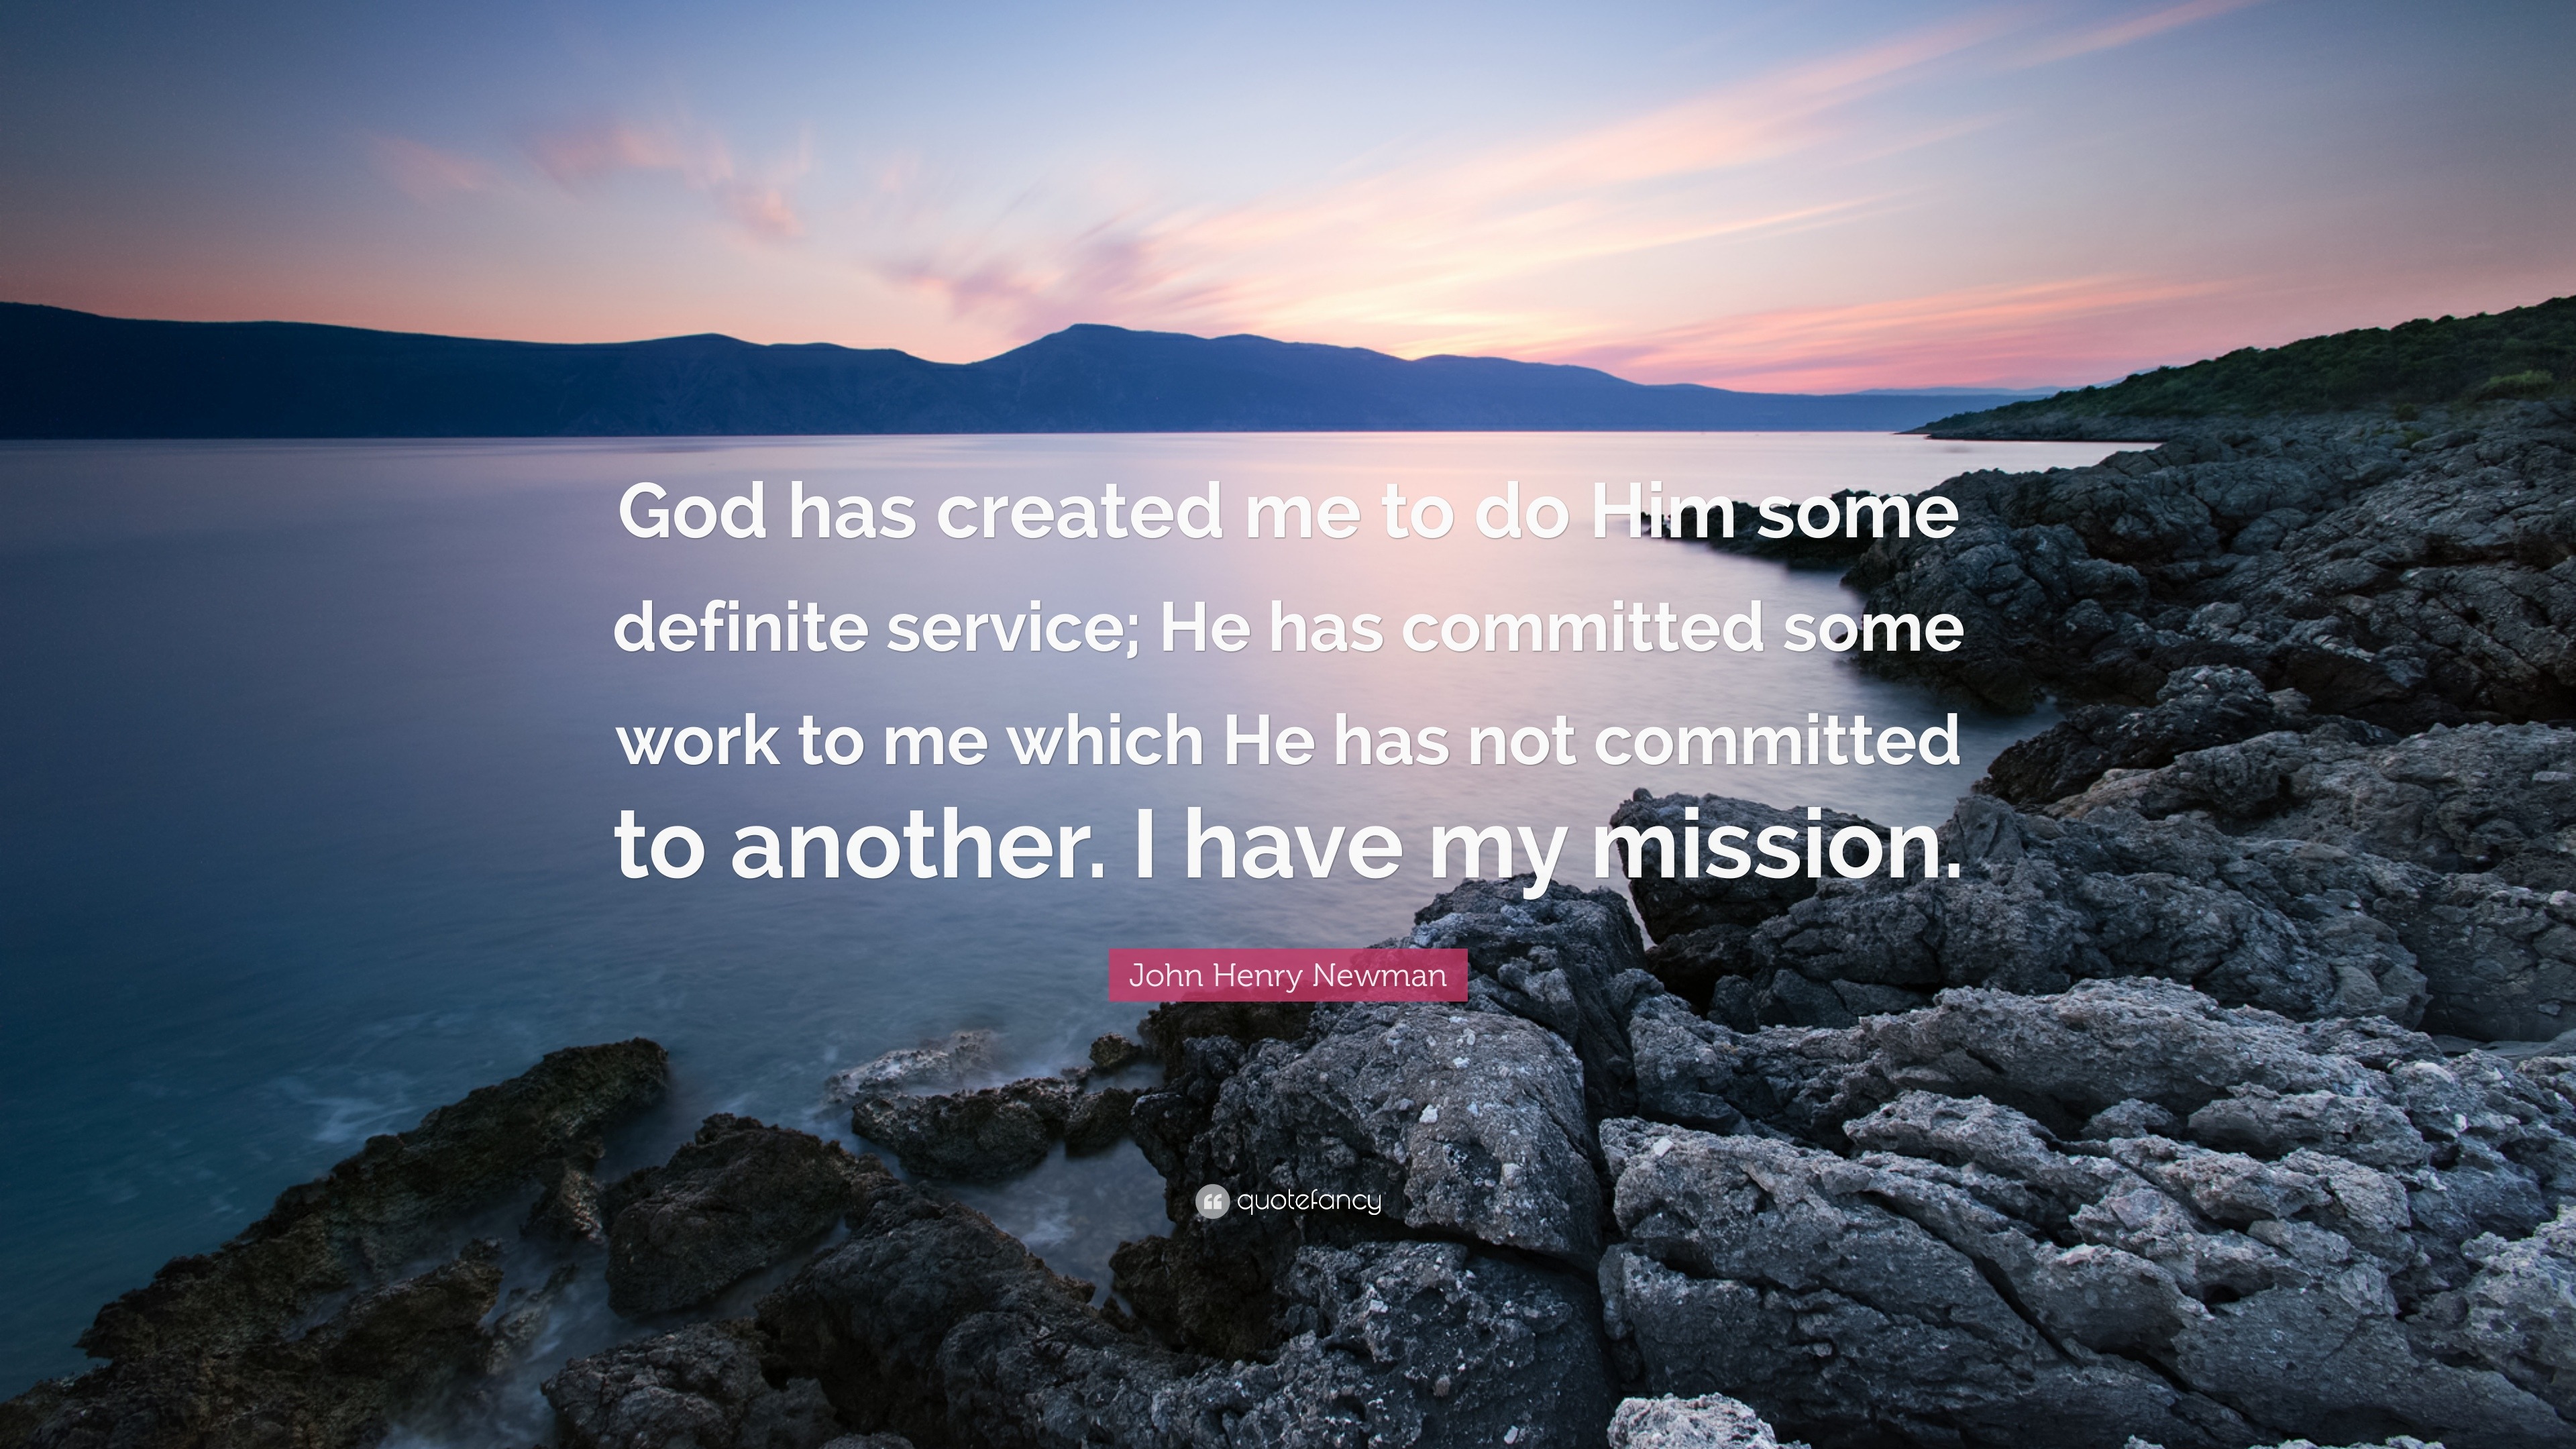 John Henry Newman Quote: “God has created me to do Him some definite